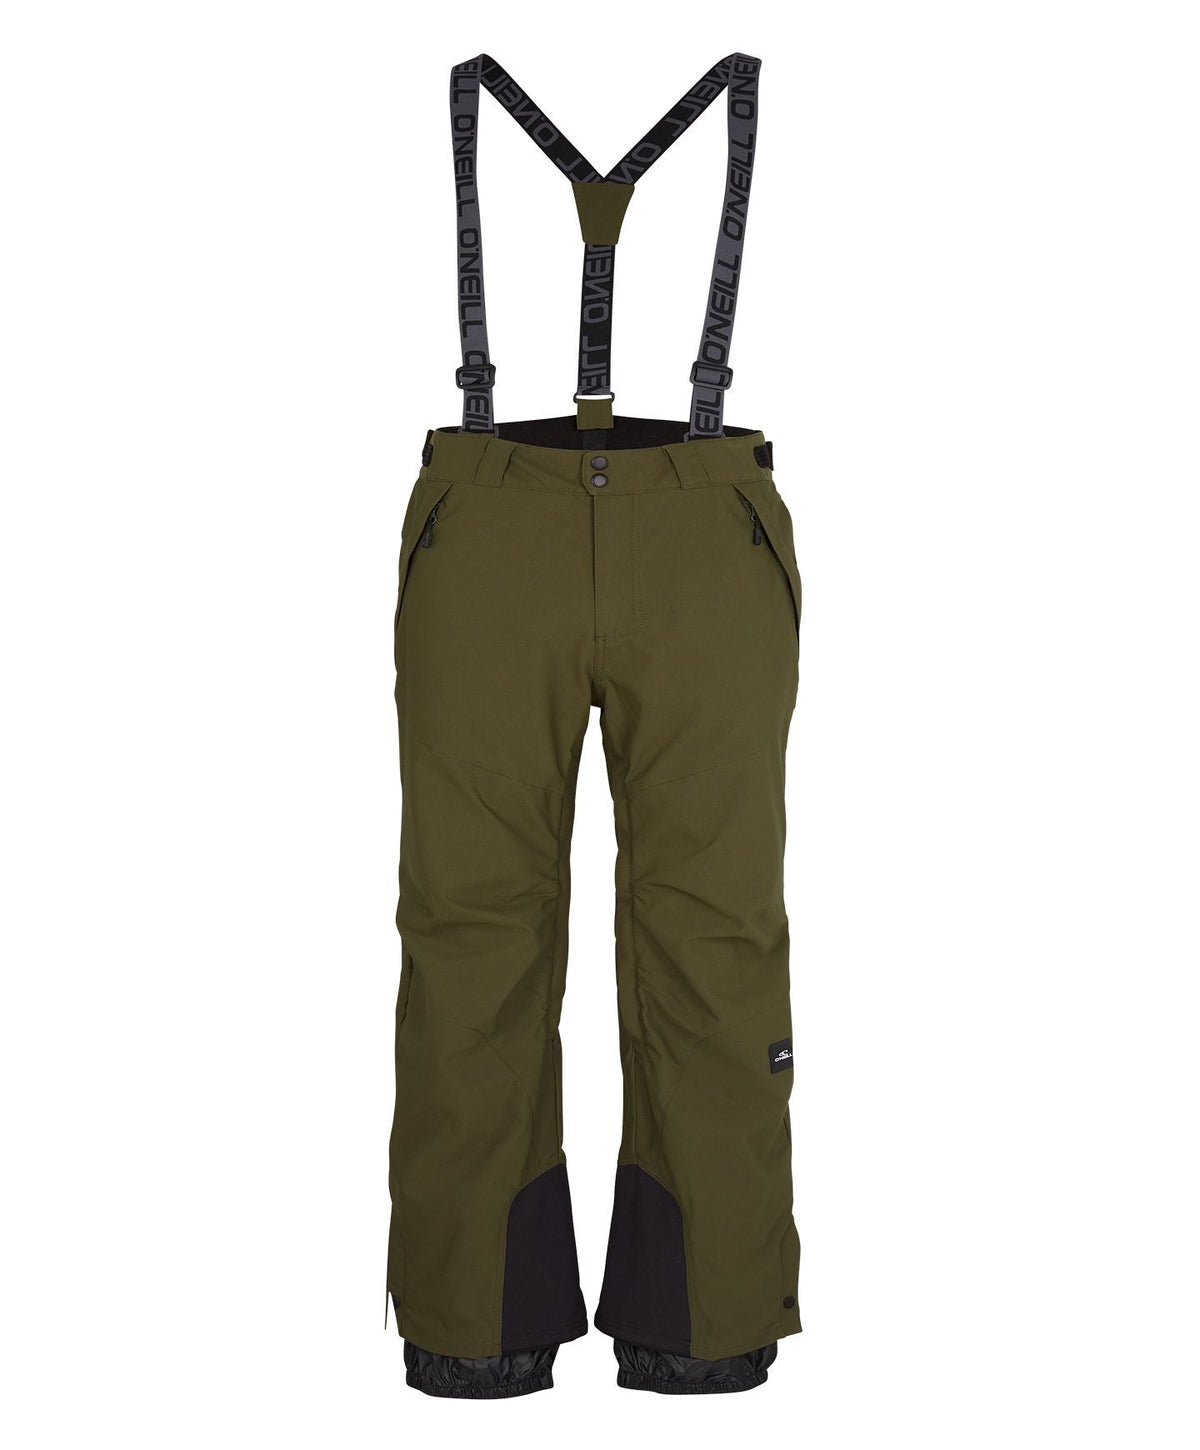 Men's Total Disorder Snow Pants - Forest Night